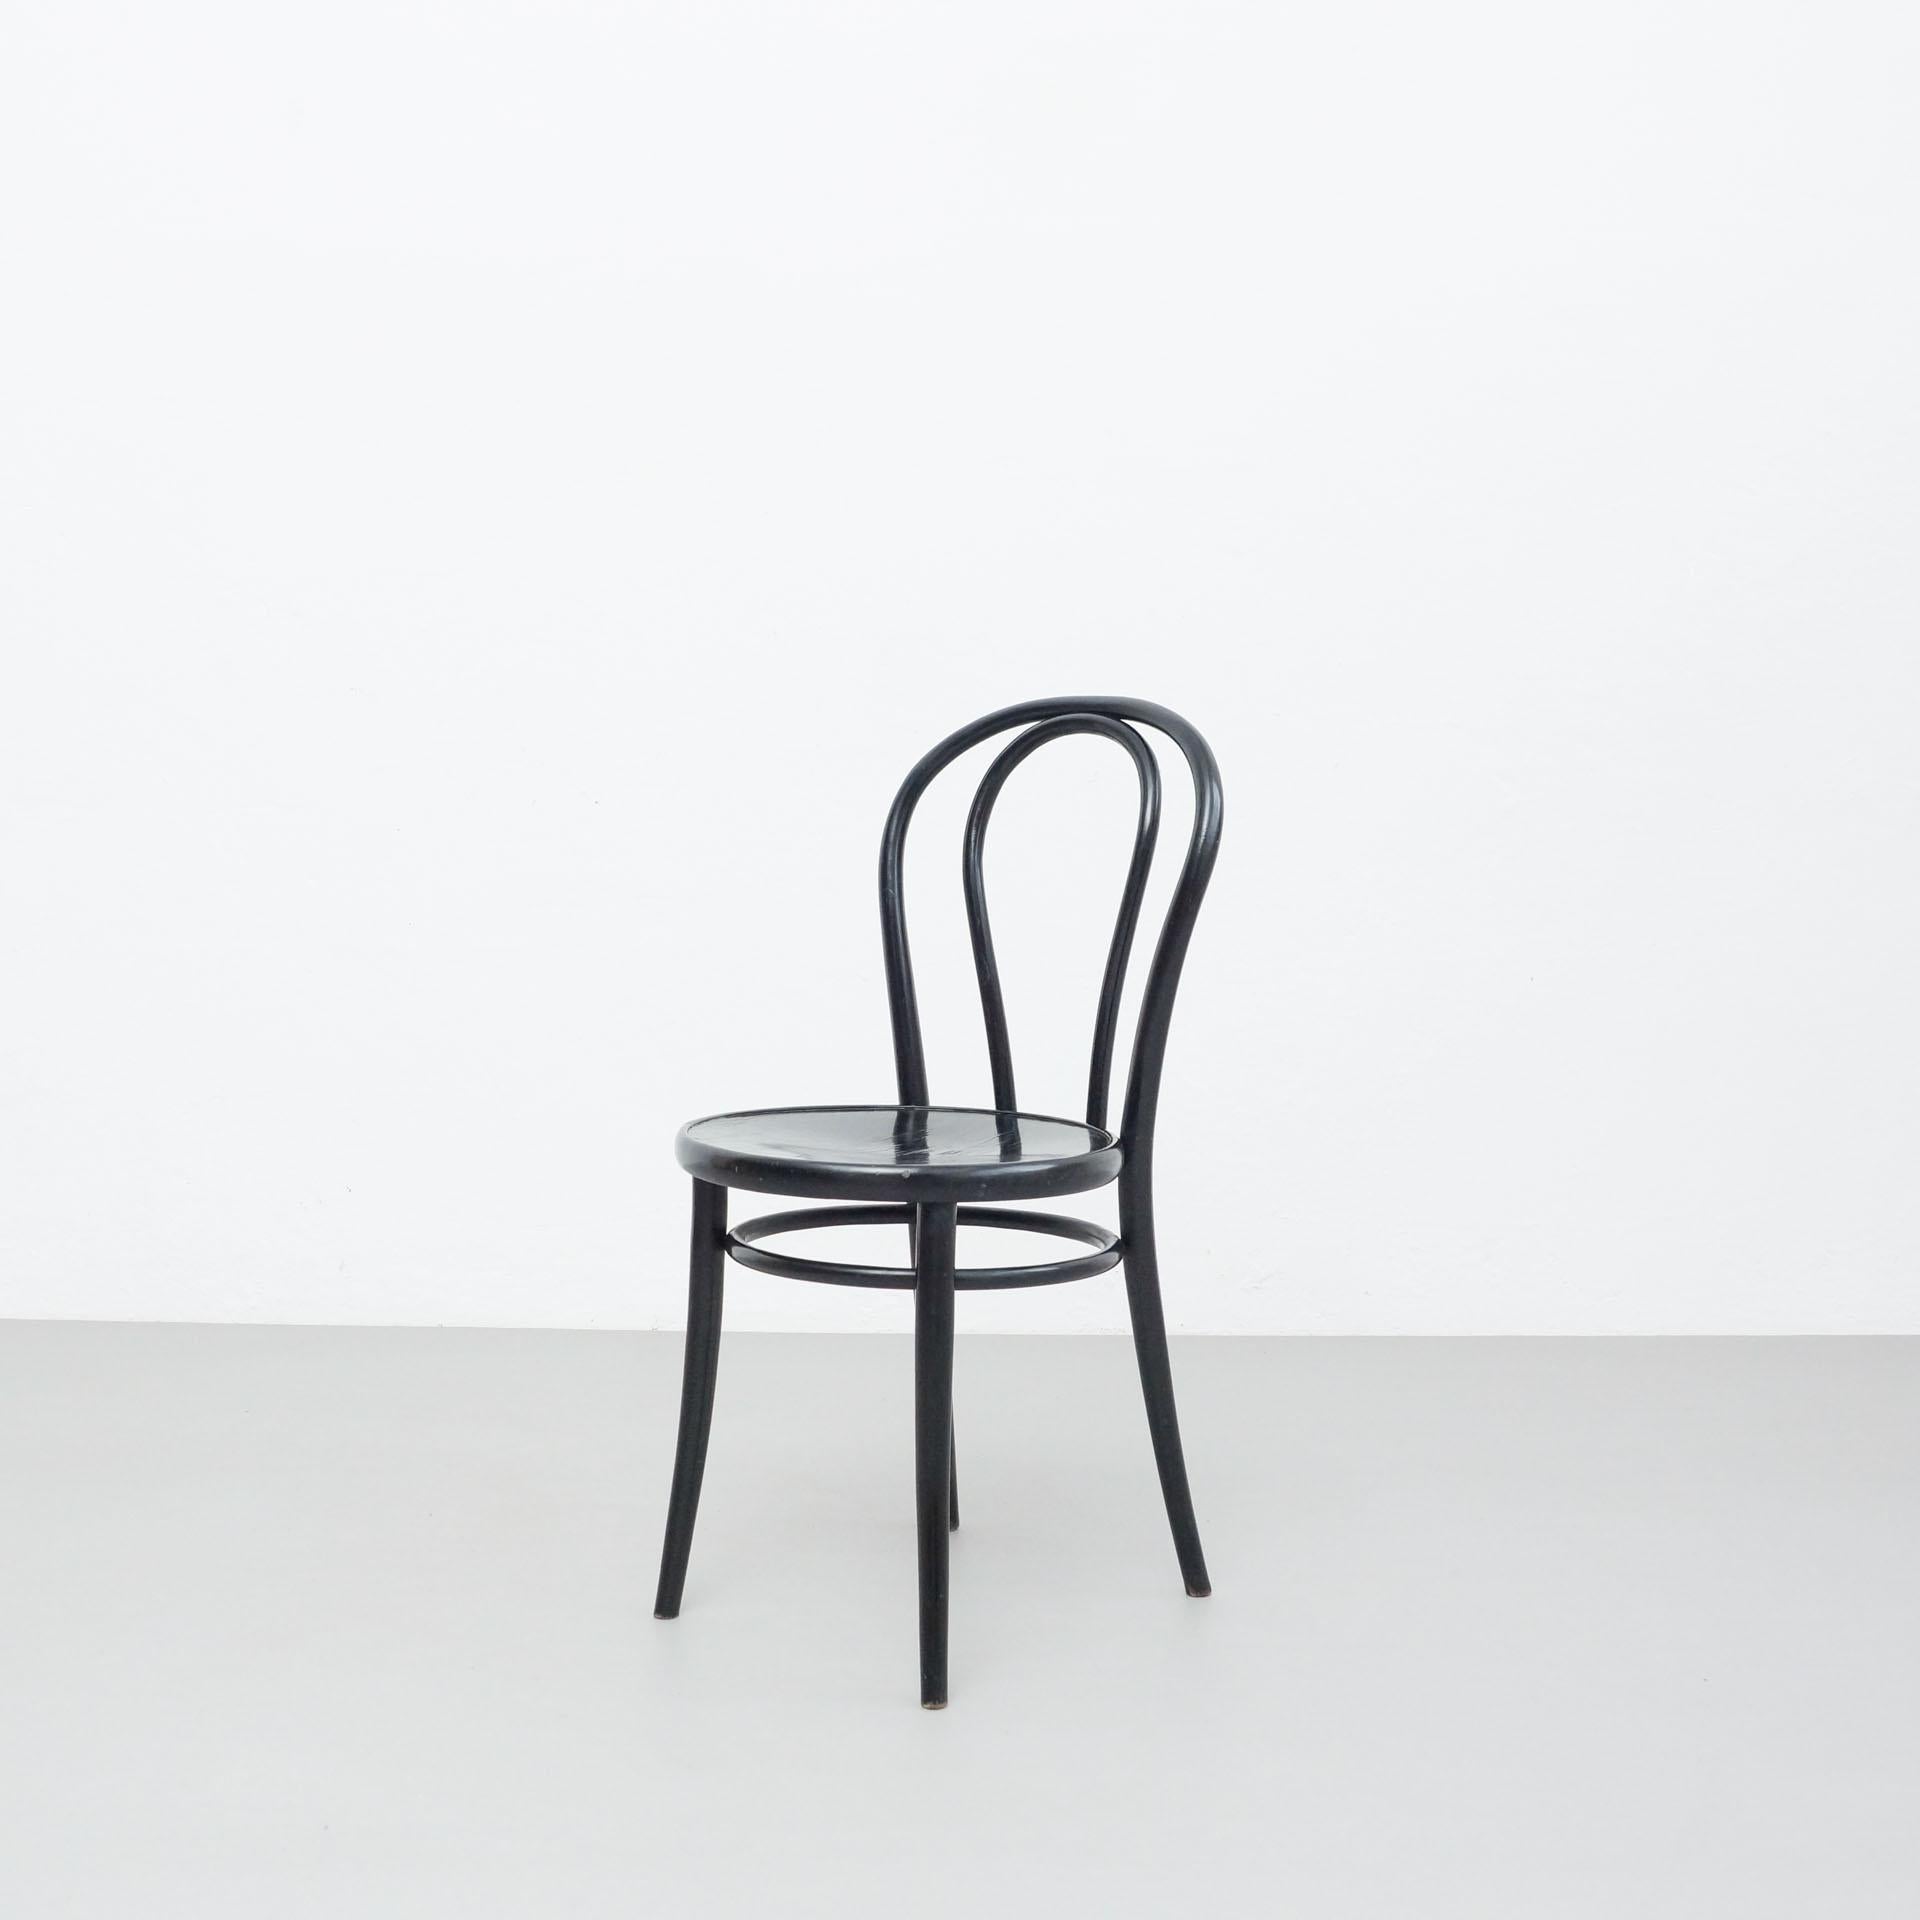 black bentwood chairs